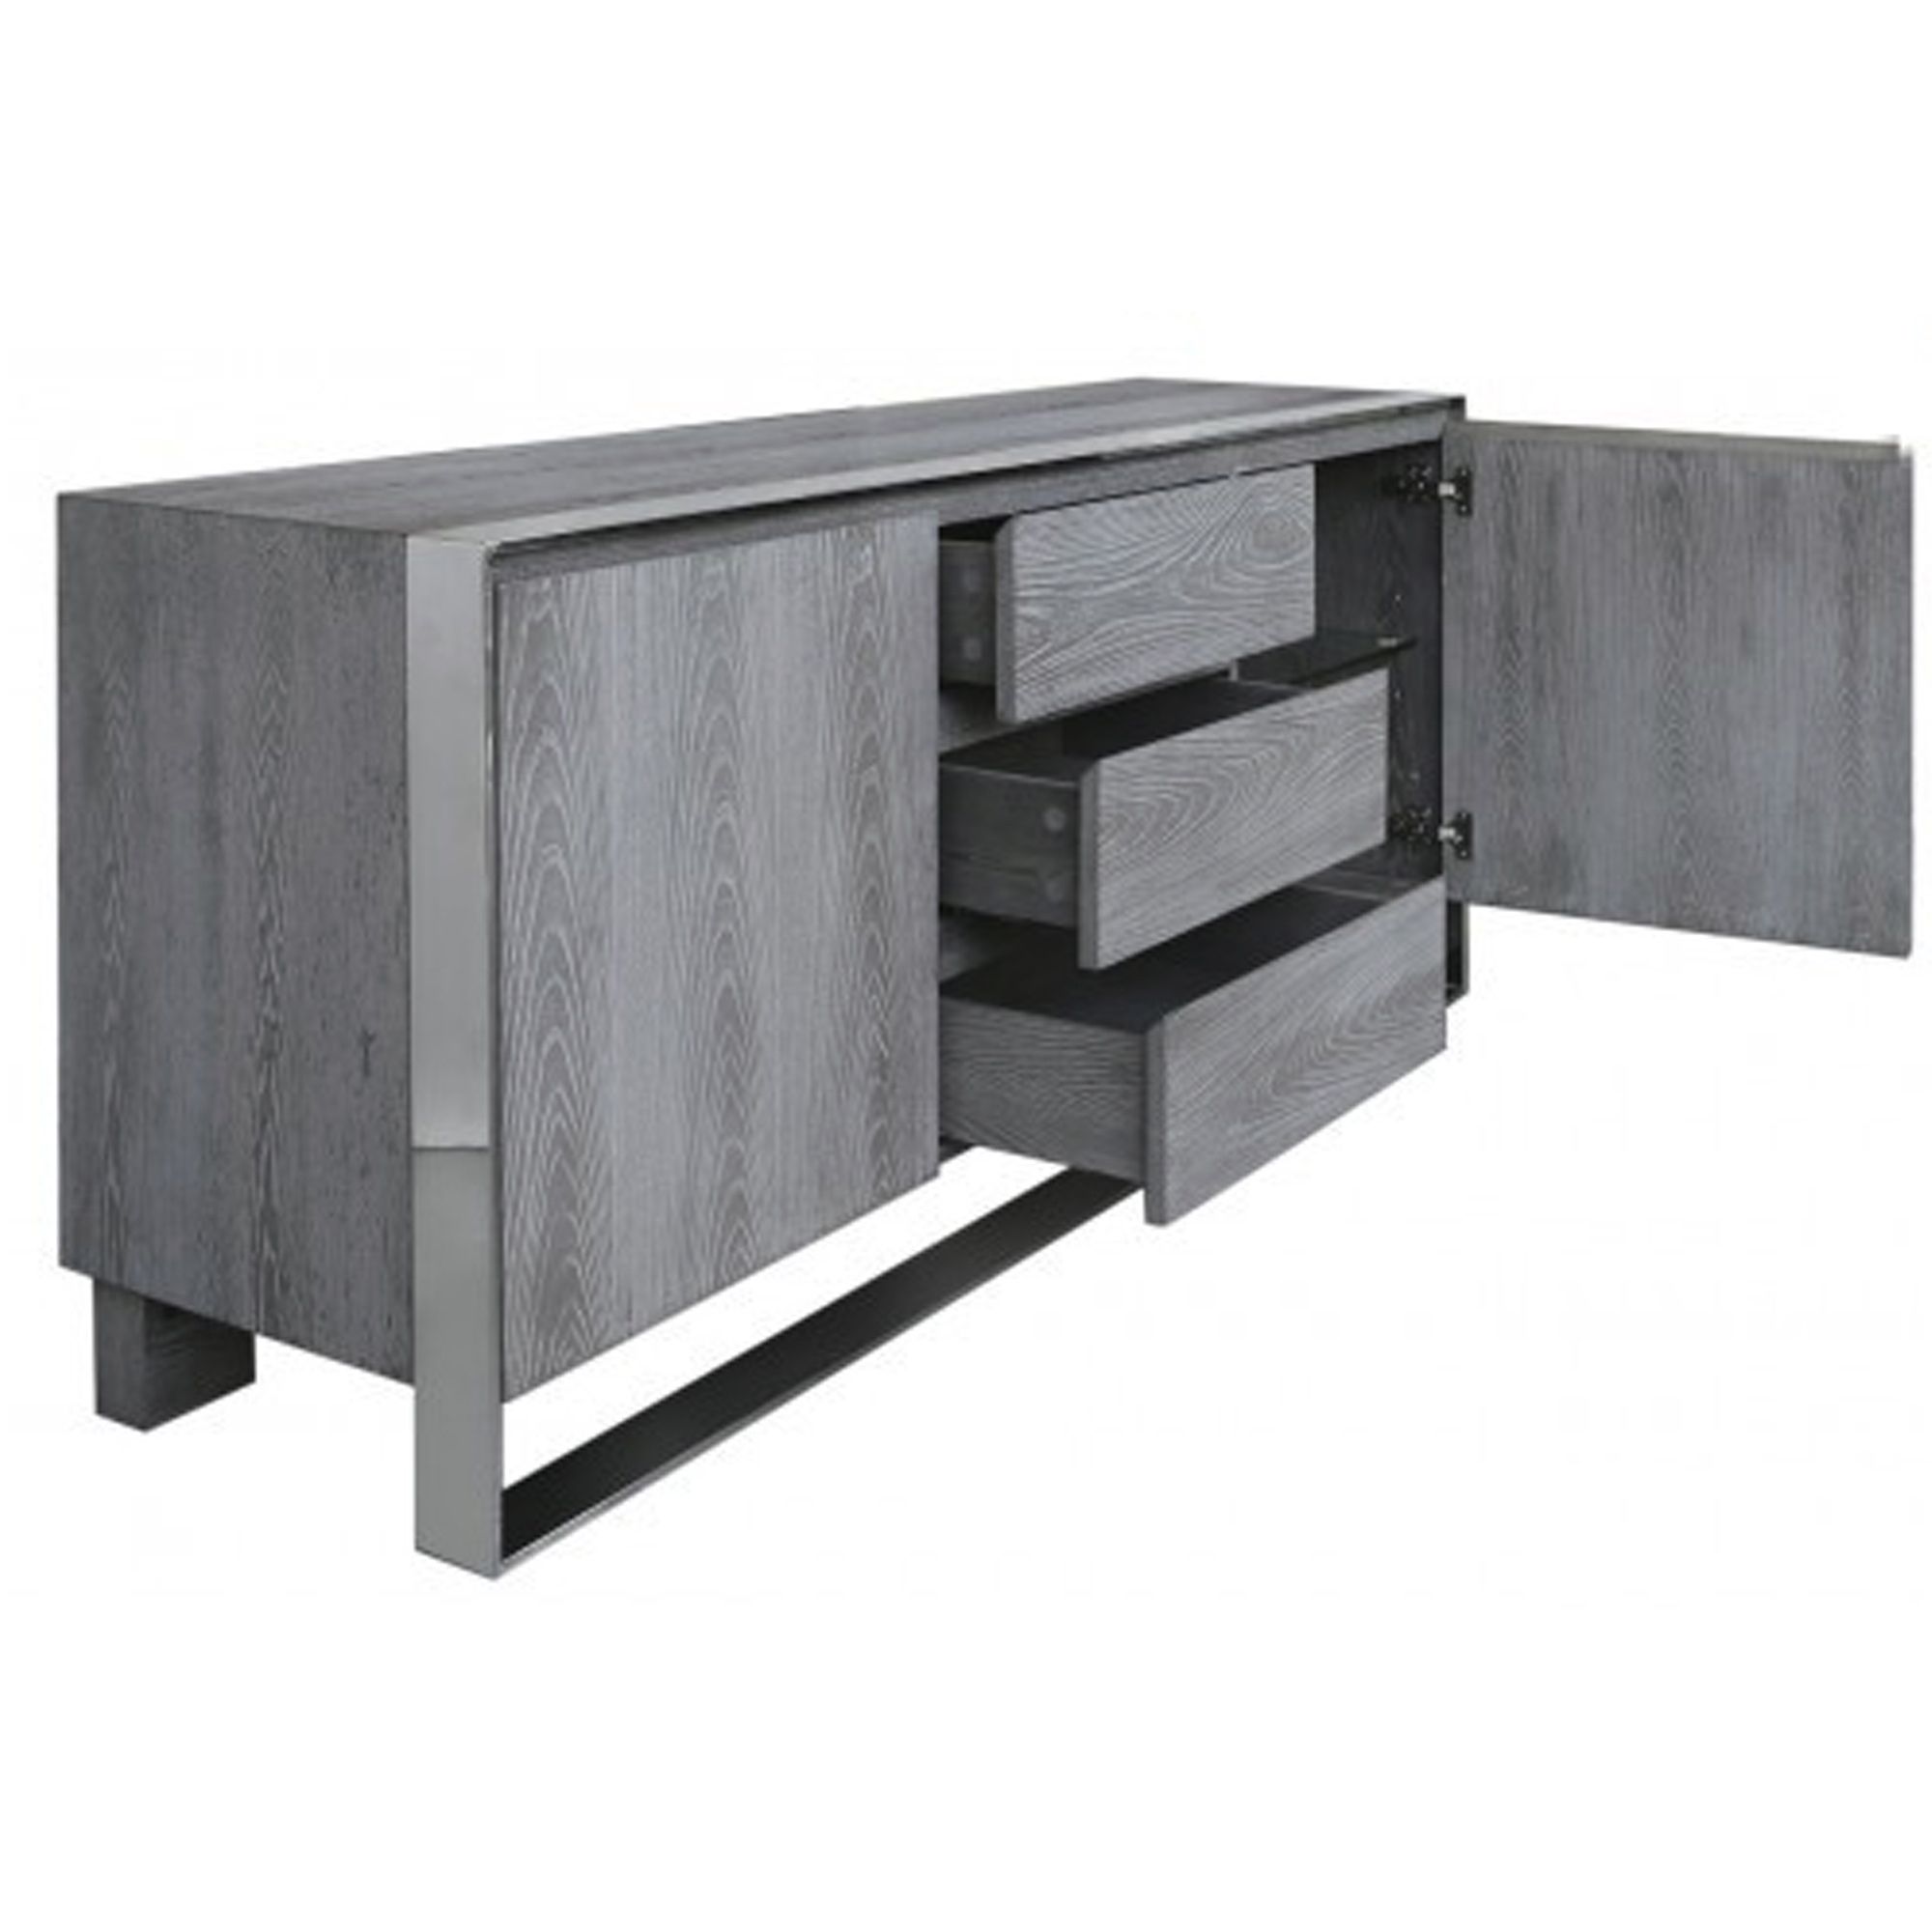 Grey Wooden Sideboard | Wooden Furniture | Sideboards Pertaining To Most Popular Gray Wooden Sideboards (View 11 of 15)